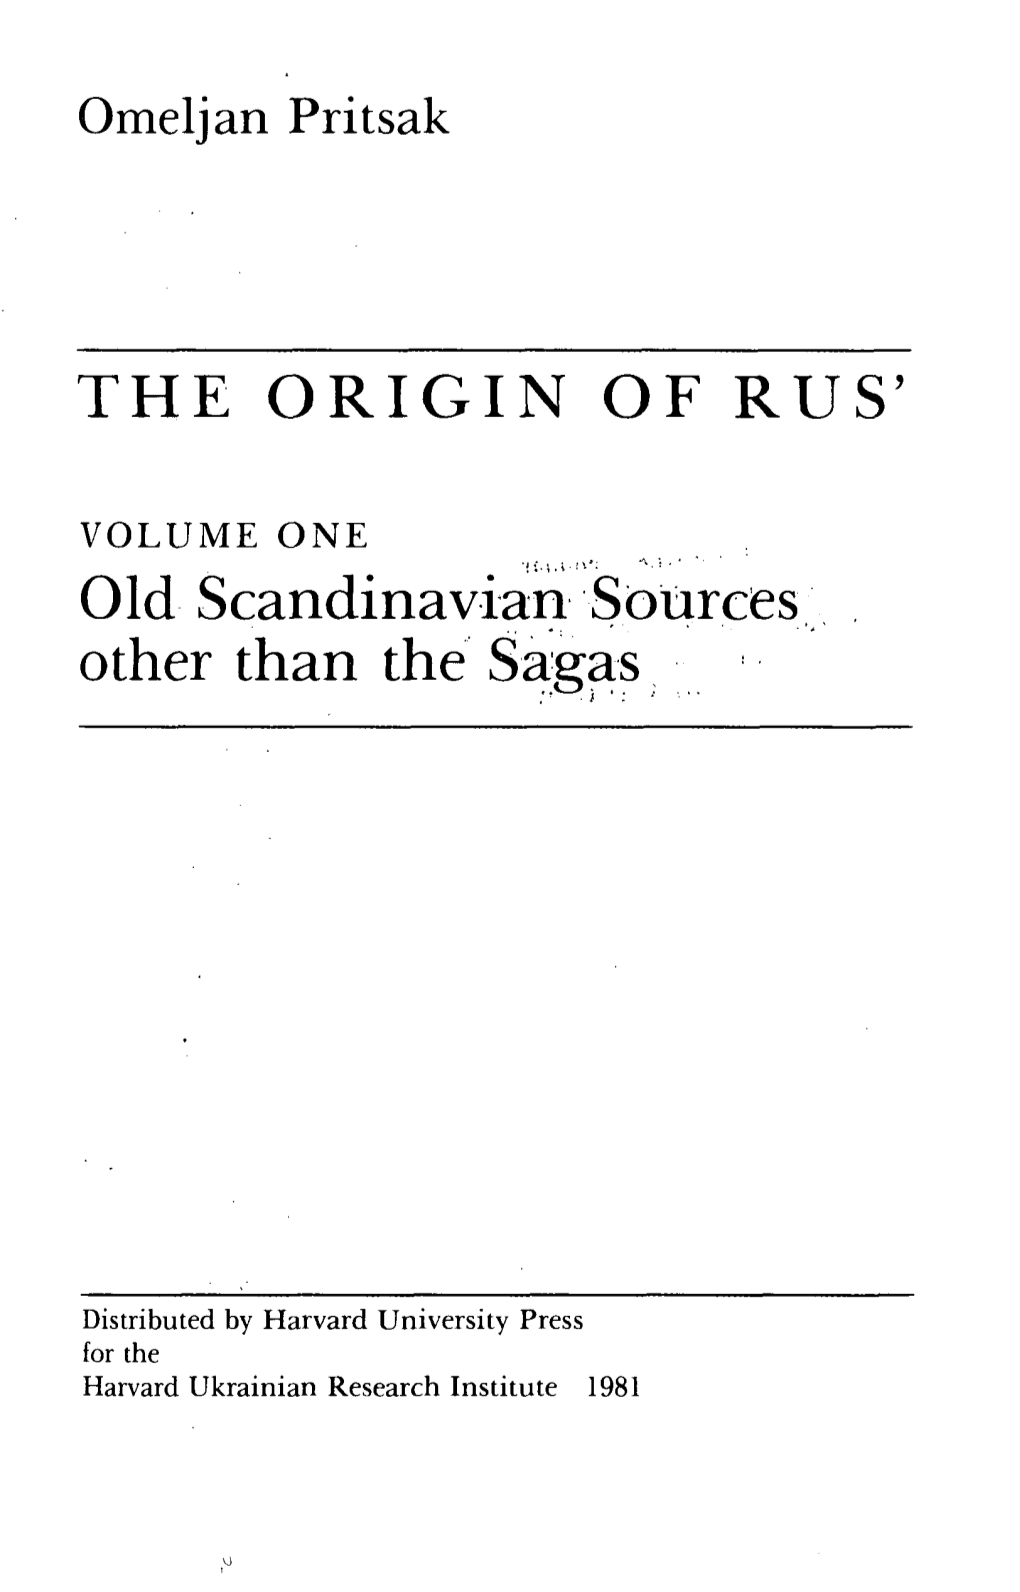 THE ORIGIN of RUS' Old Scandinavian Sources Other Than